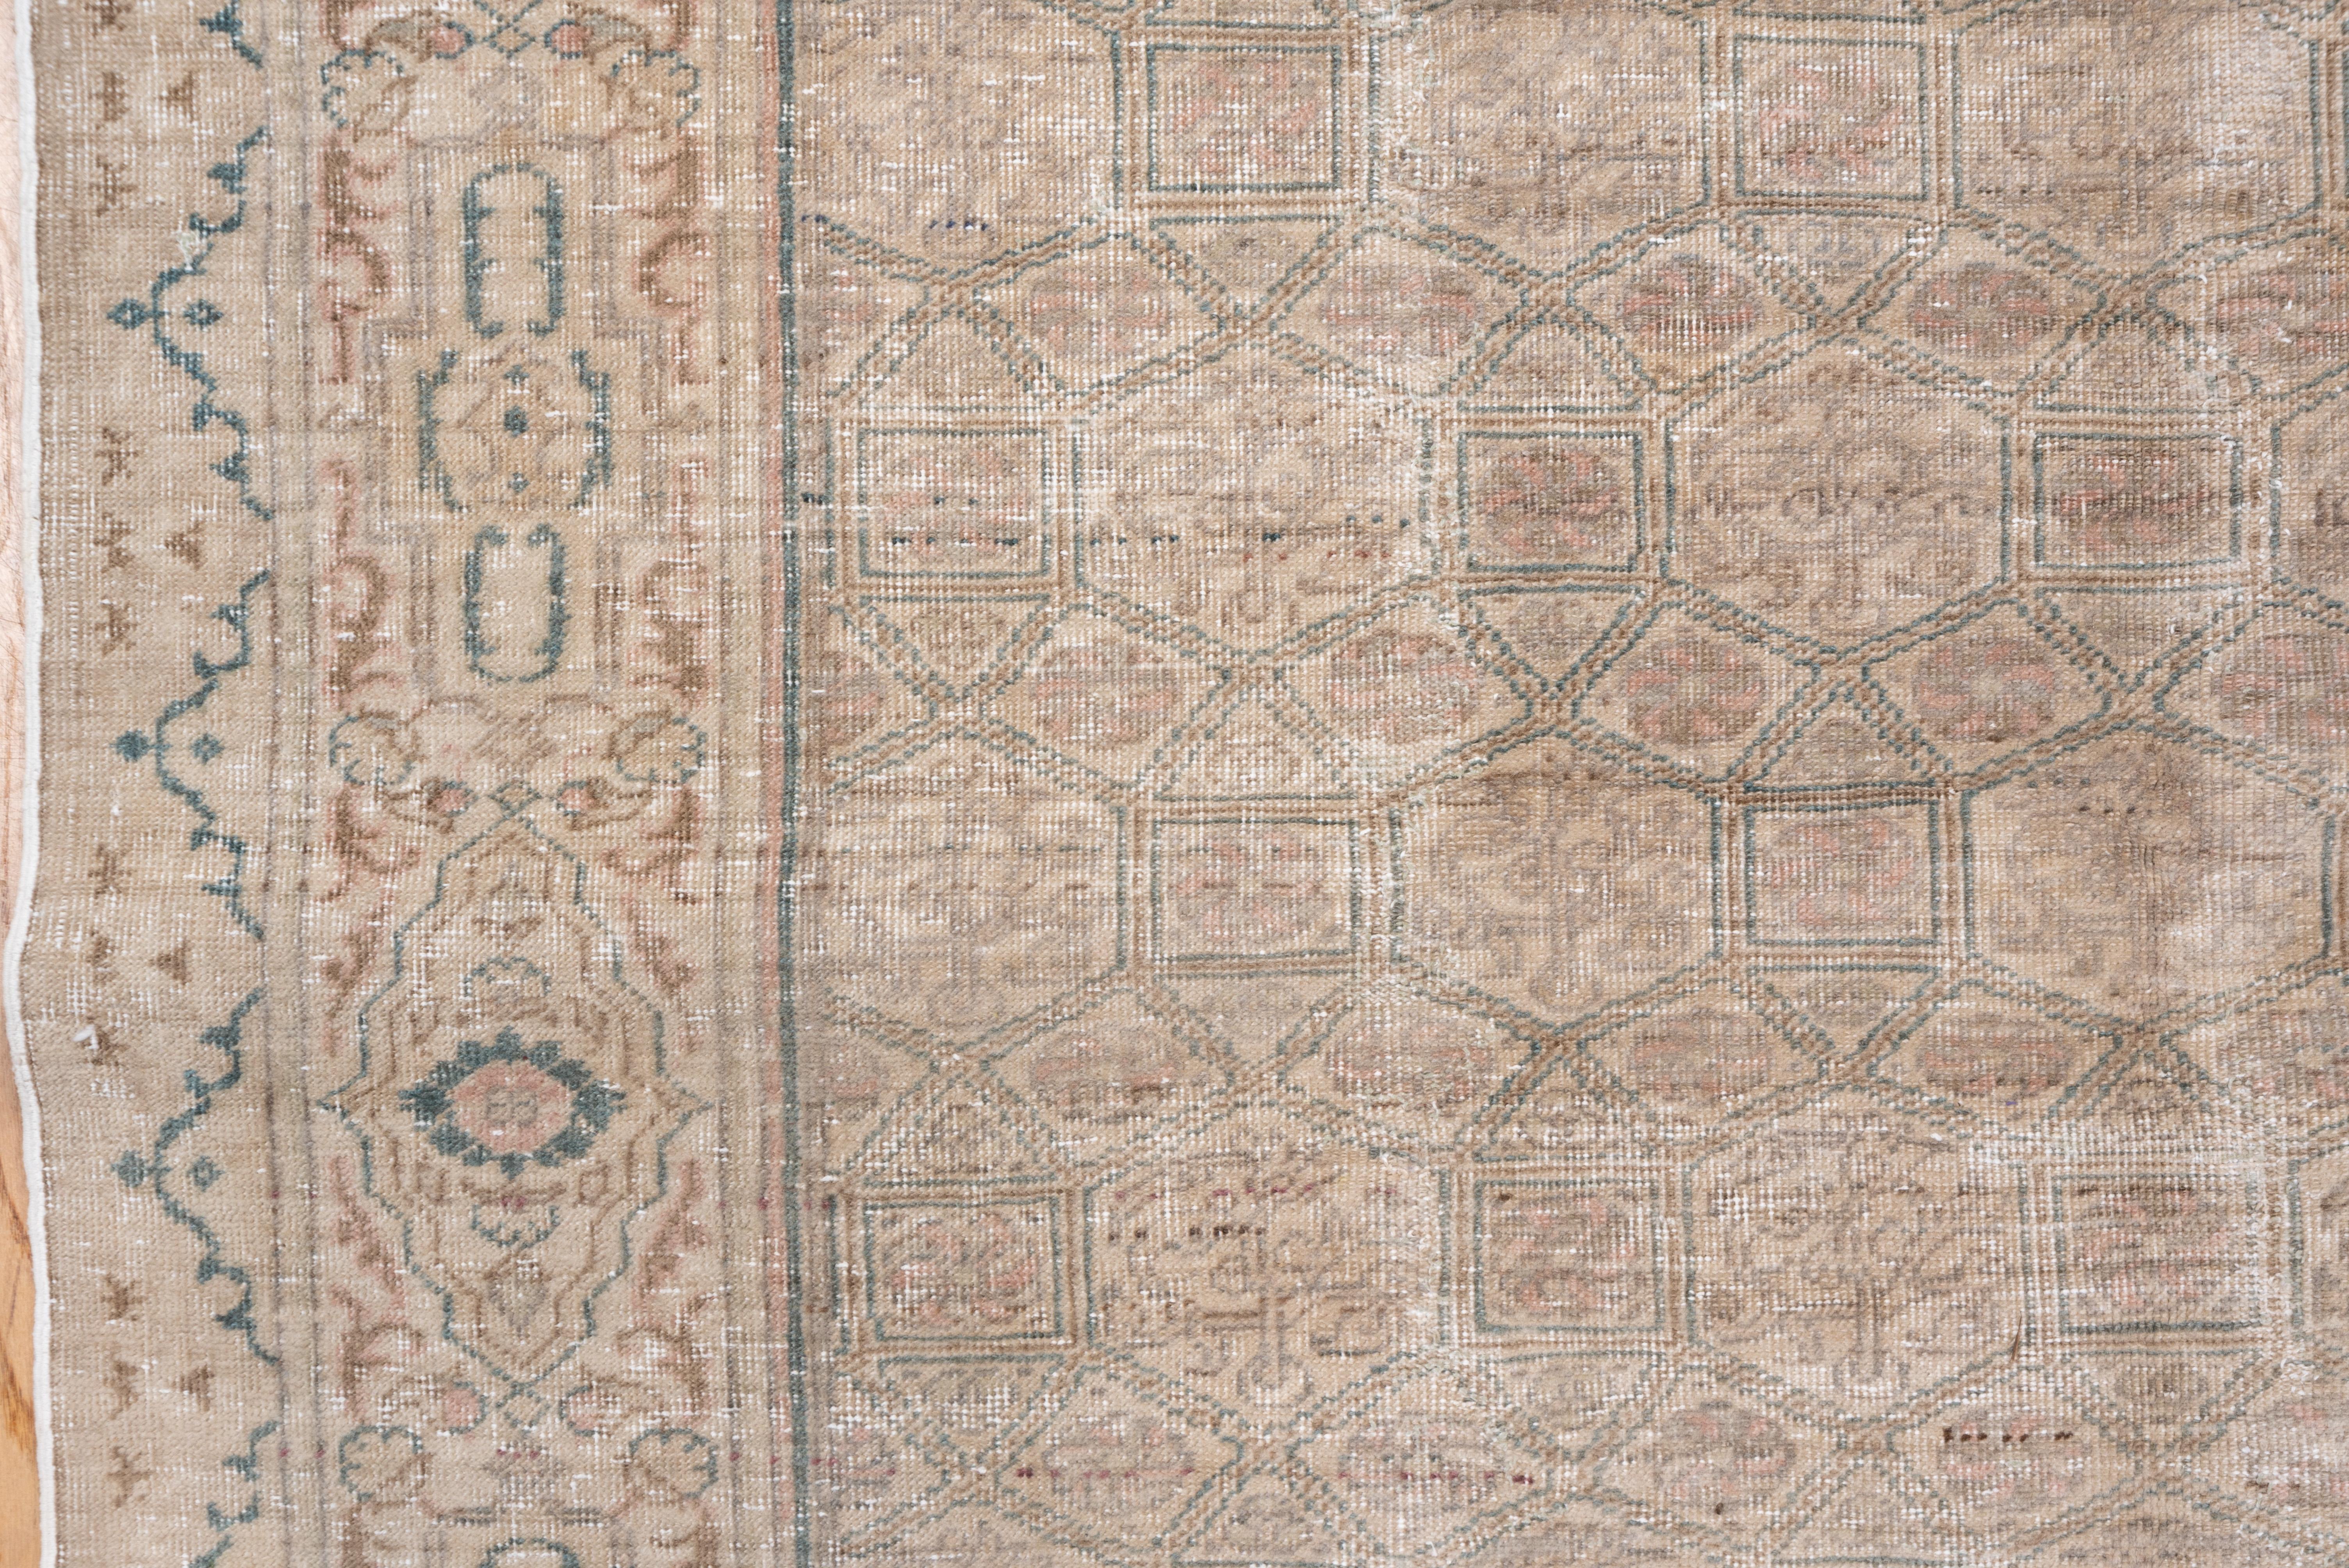 The ecru field displays a lattice of small squares, triangles and rhomboids, with end enclosed rosette and flower design. The beige-ecru border shows cartouches and rosettes. Medium green details. Medium weave. Vertical wear lines.